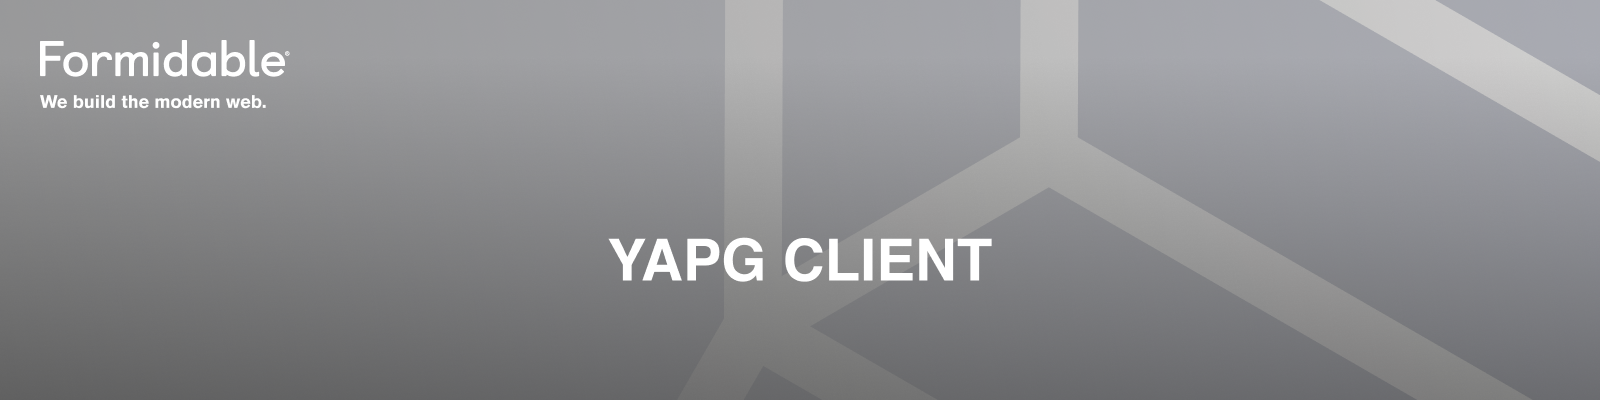 yapg-client — Formidable, We build the modern web